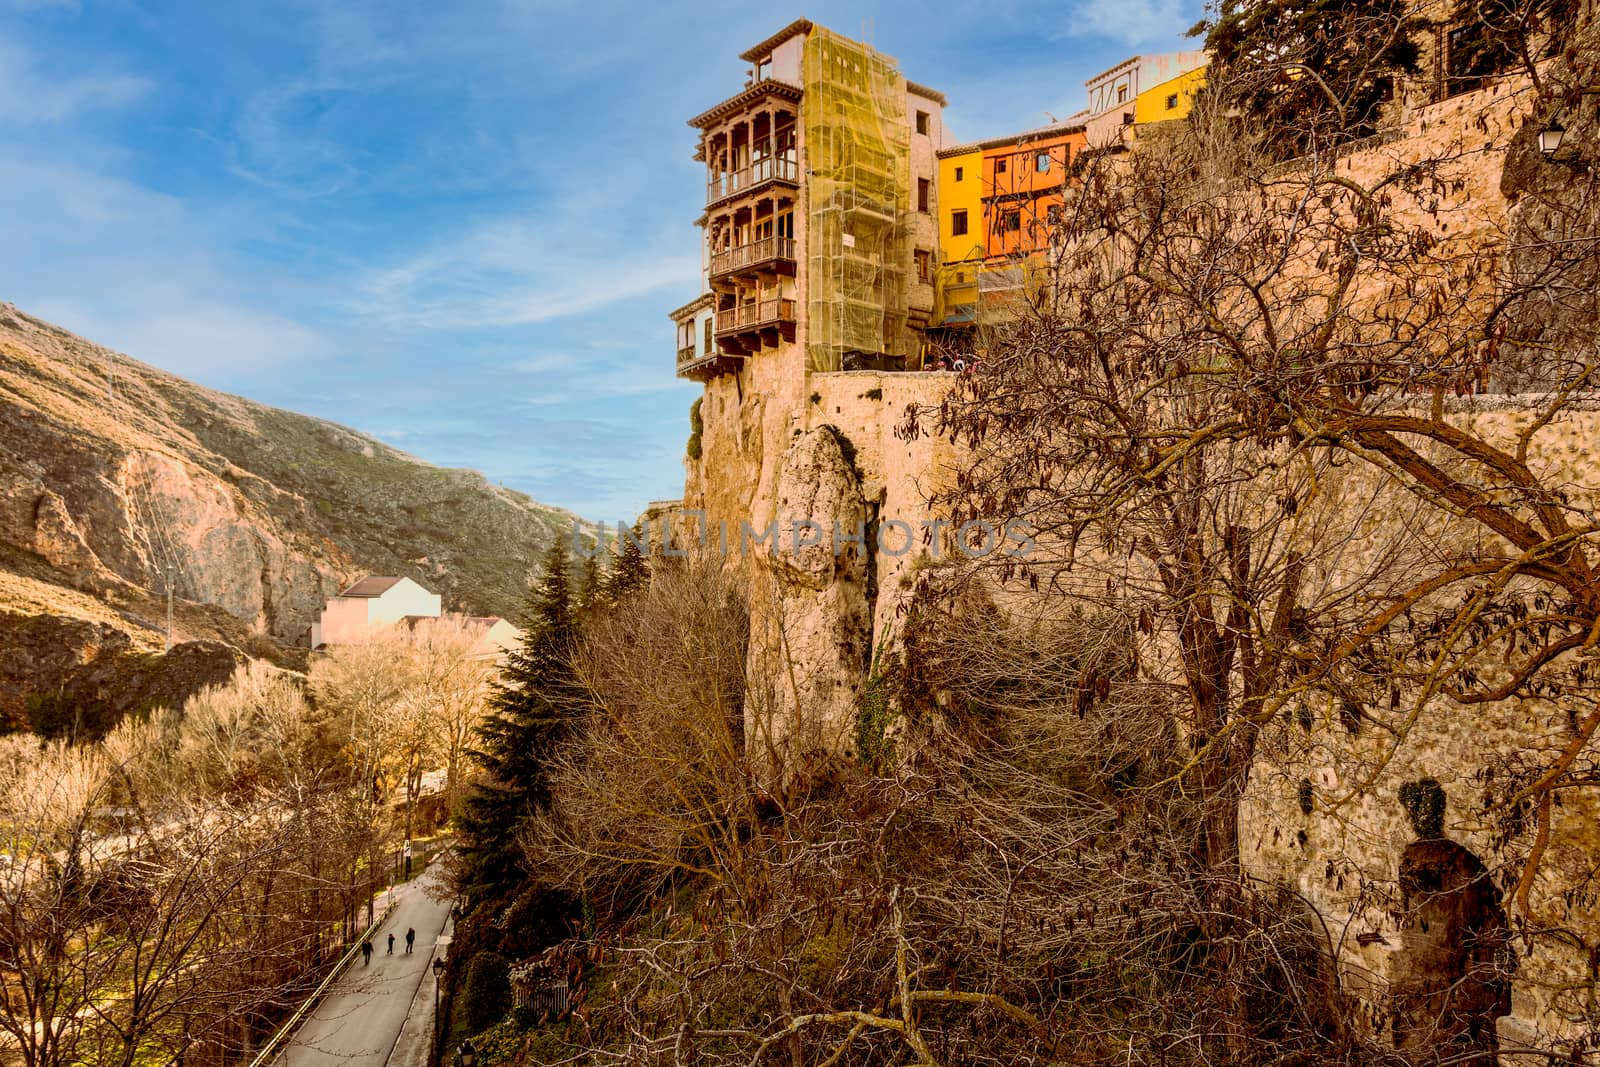 Hanging houses on the cliffs in the city of Cuenca. Spain